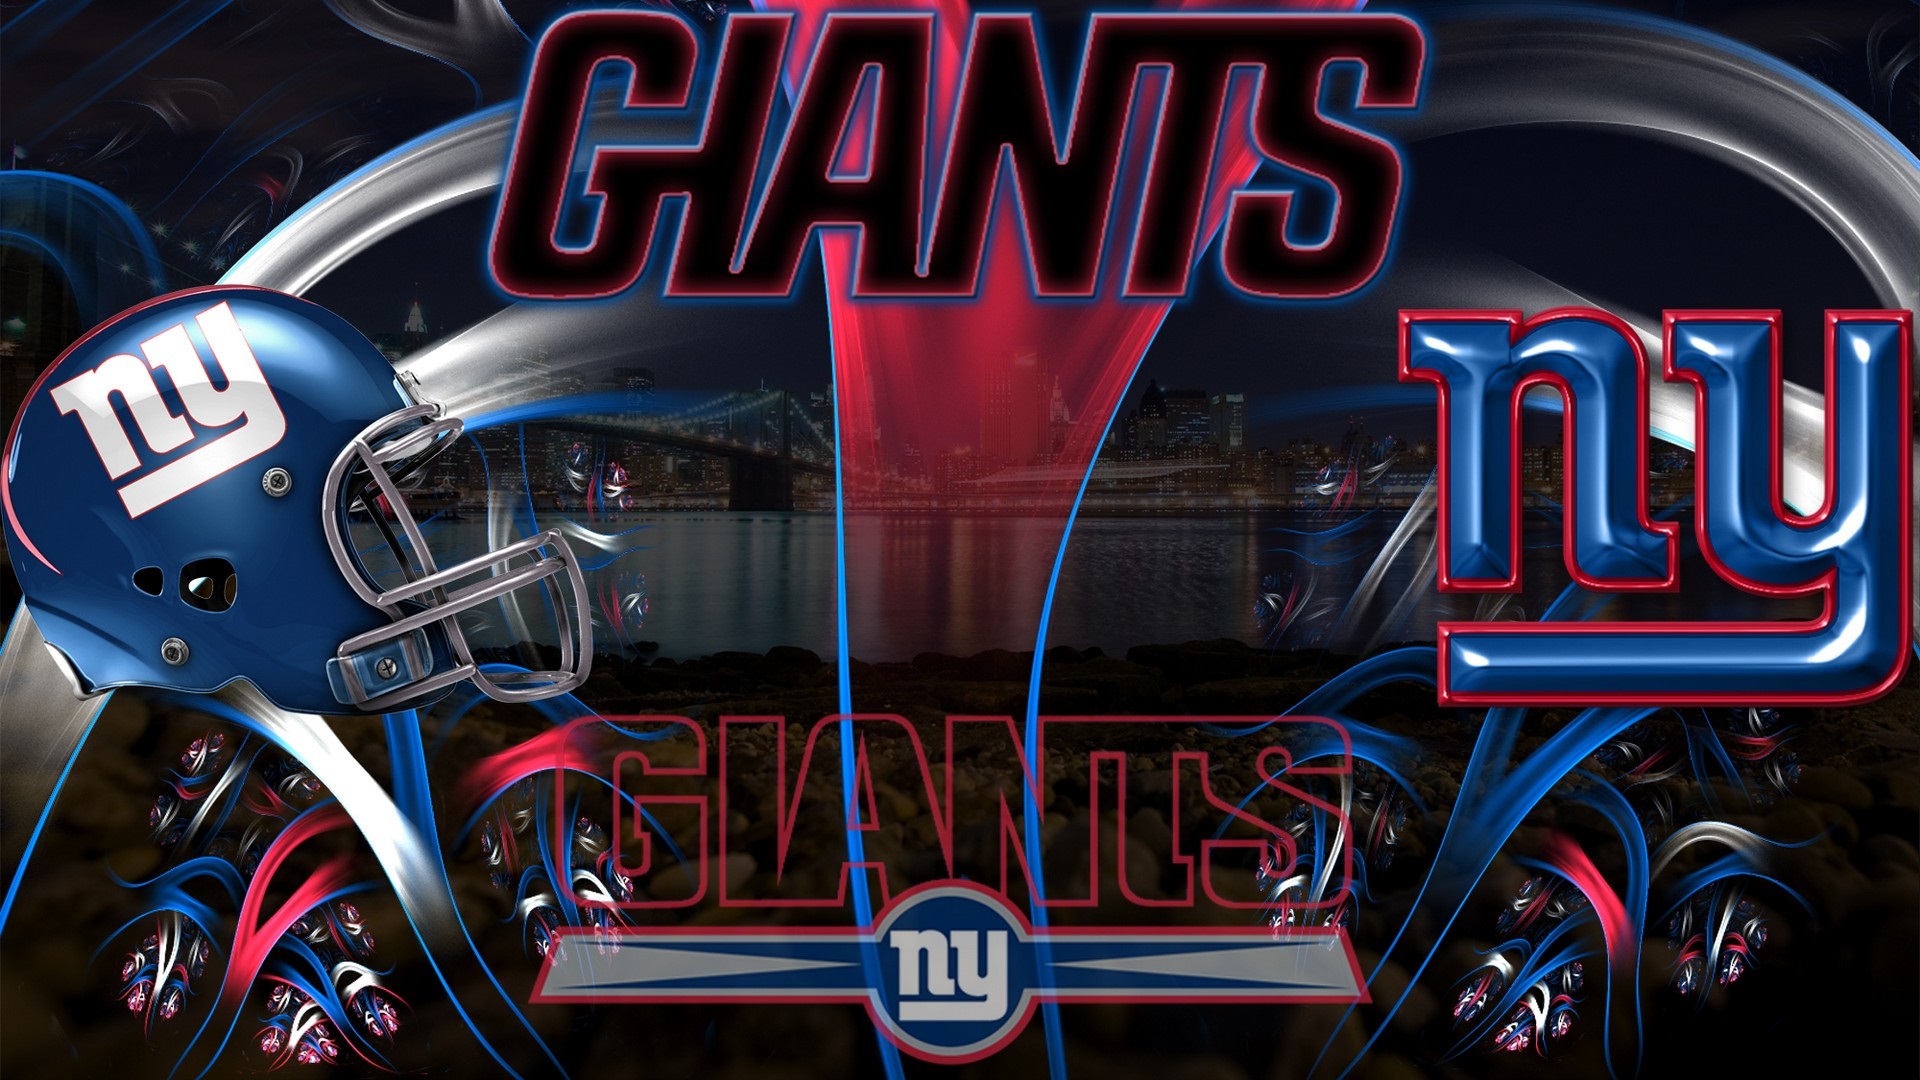 New York Giants Mac Backgrounds With high-resolution 1920X1080 pixel. You can use this wallpaper for your Mac or Windows Desktop Background, iPhone, Android or Tablet and another Smartphone device